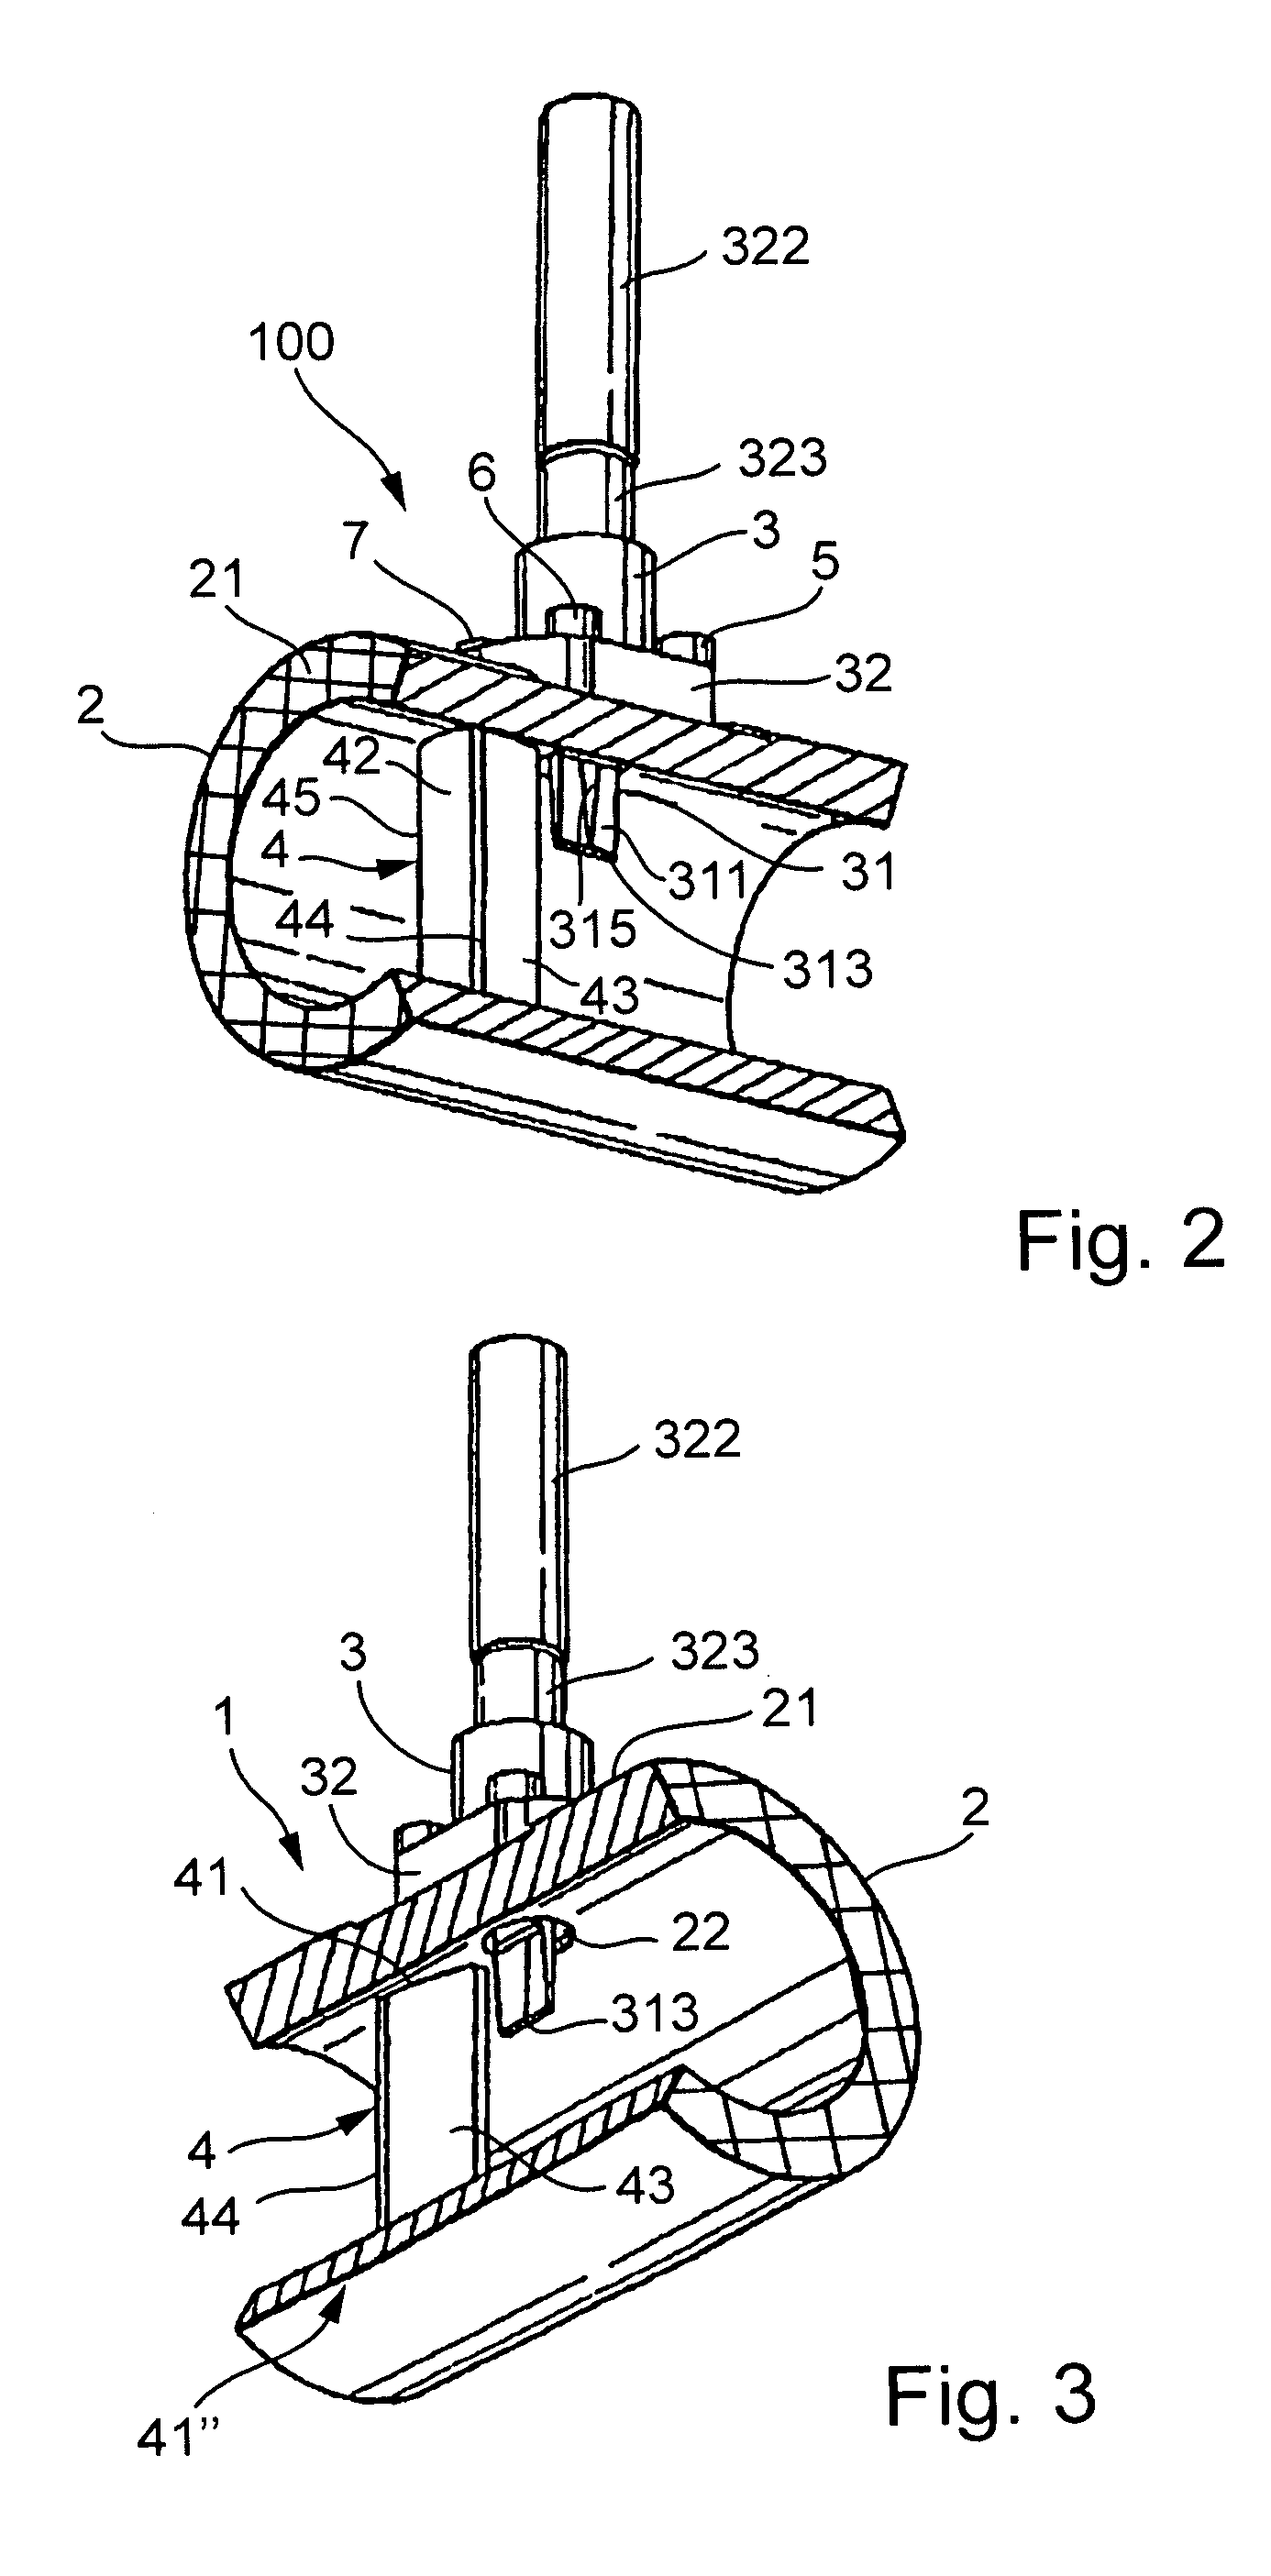 Measuring system for a medium flowing in a process line